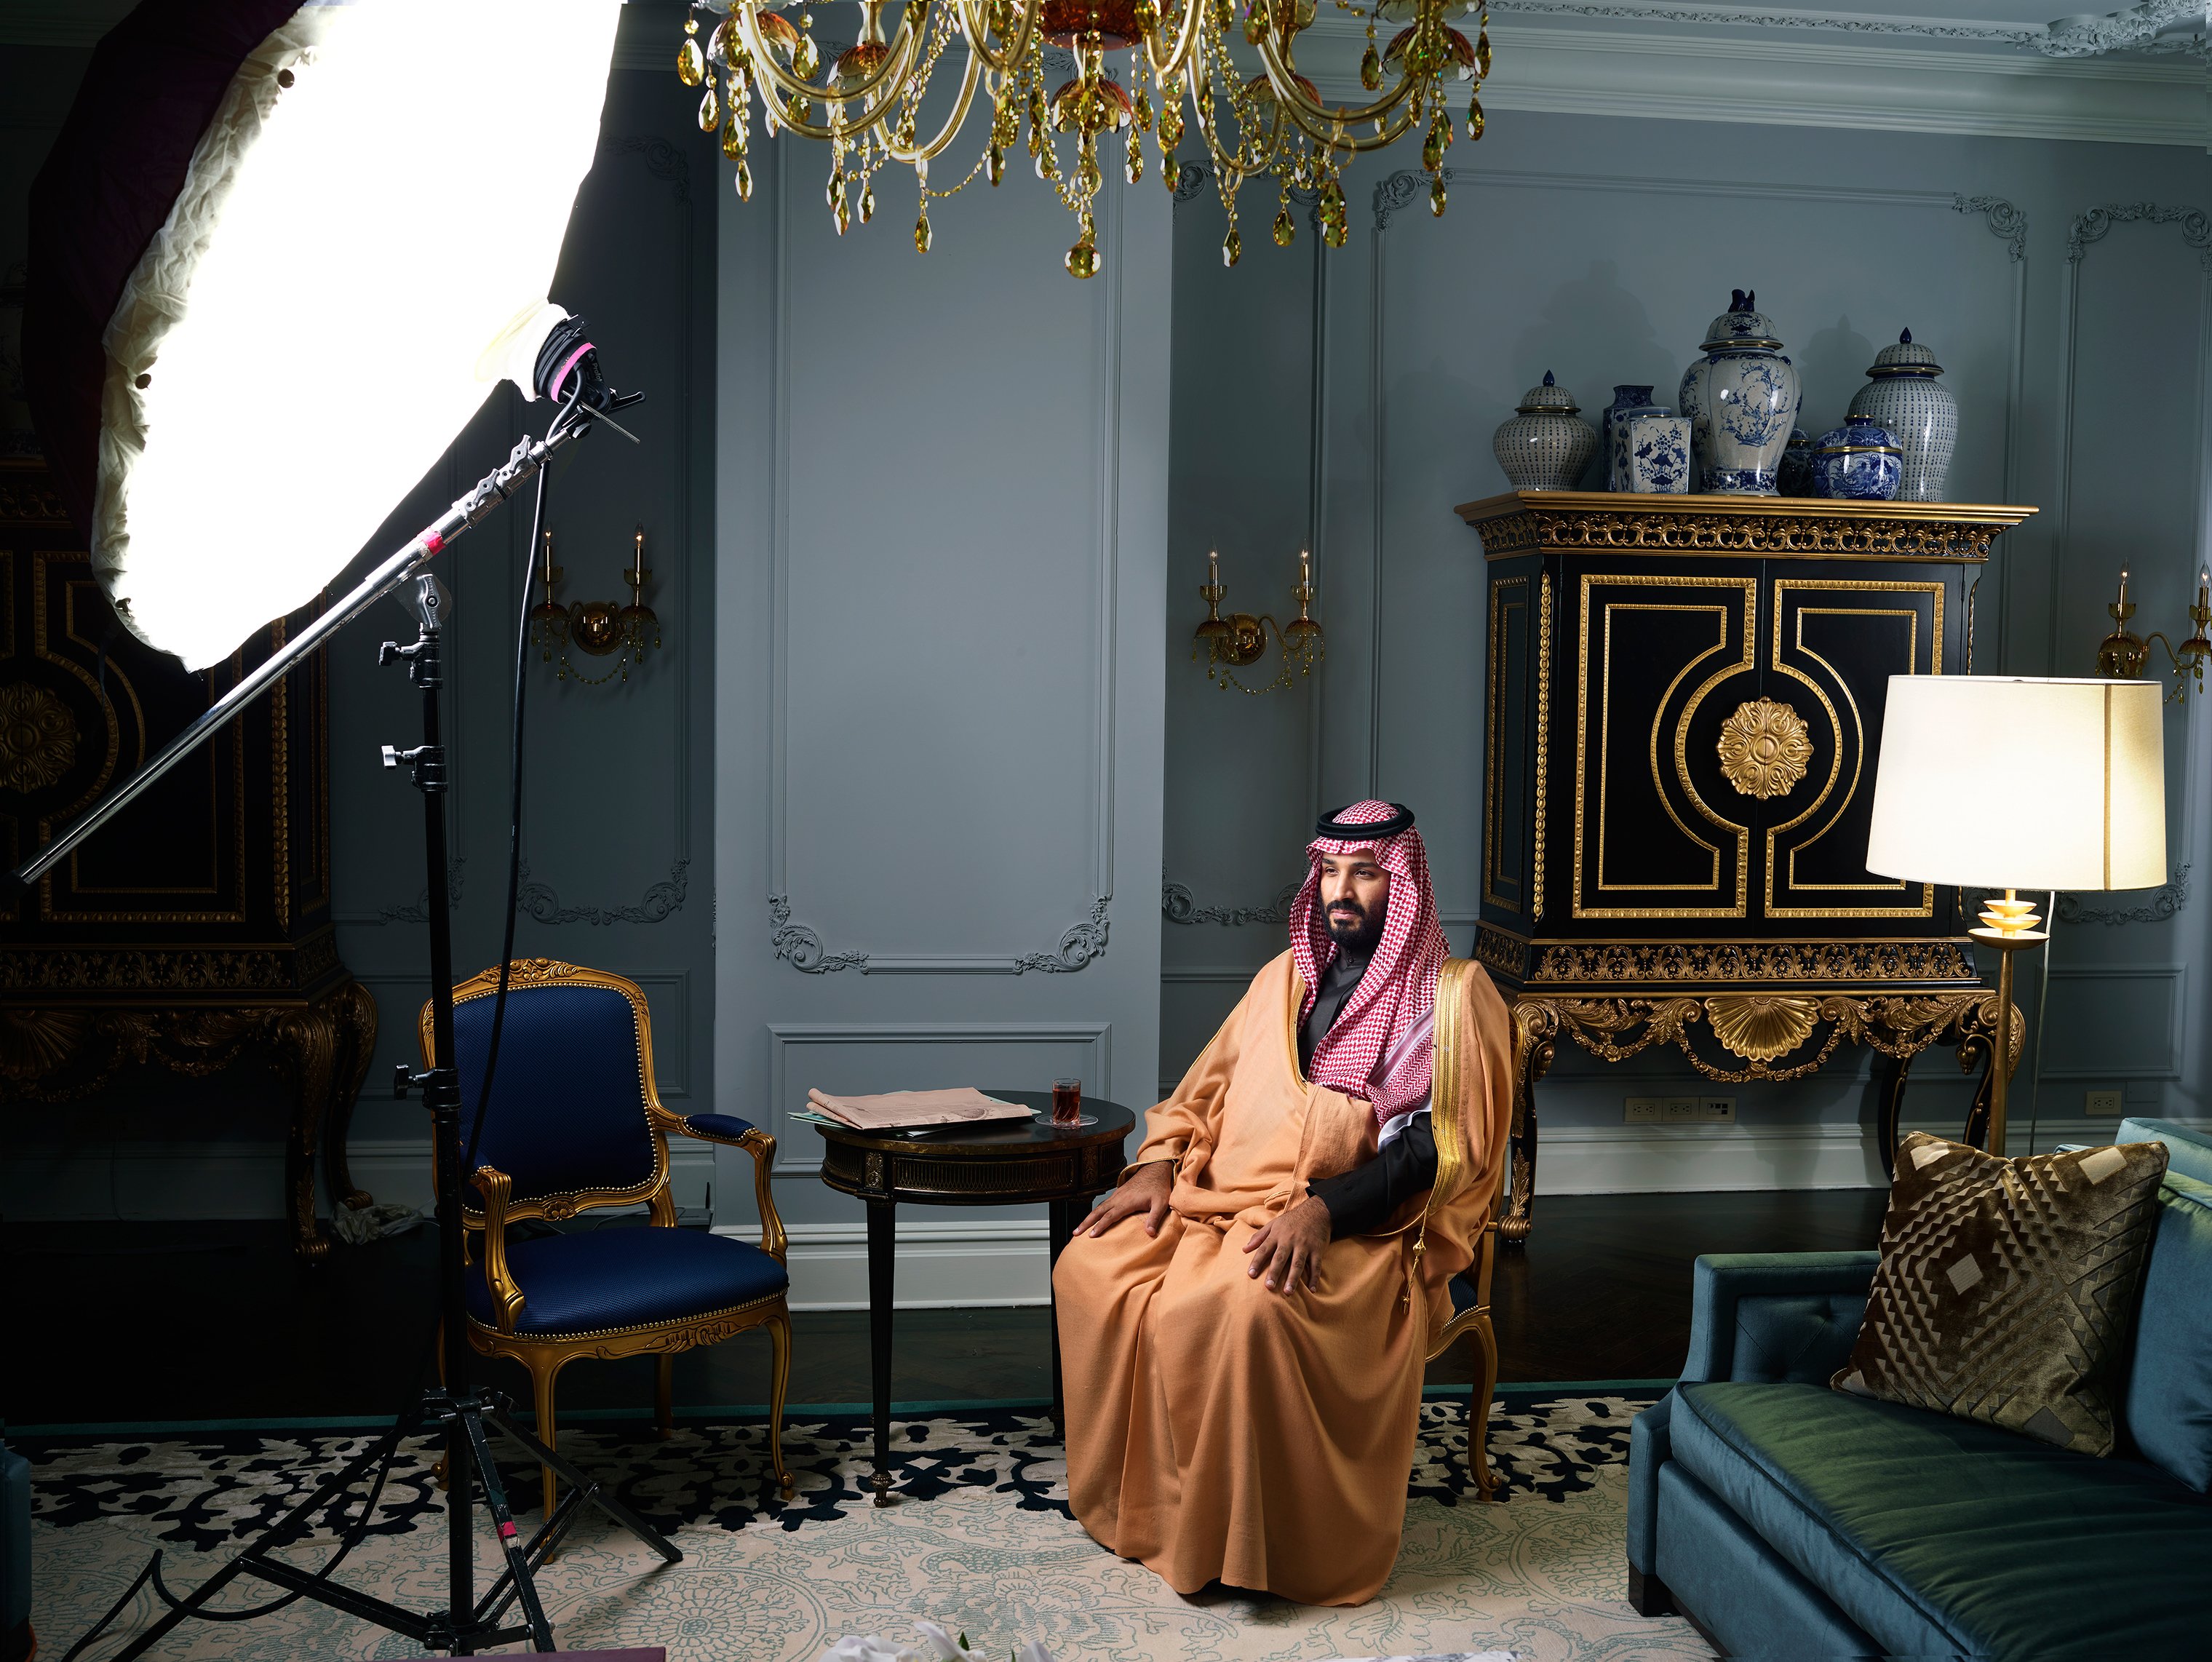 Crown Prince Mohammed bin Salman photographed at New York City's Plaza Hotel on March 29, 2018. (Martin Schoeller for TIME)